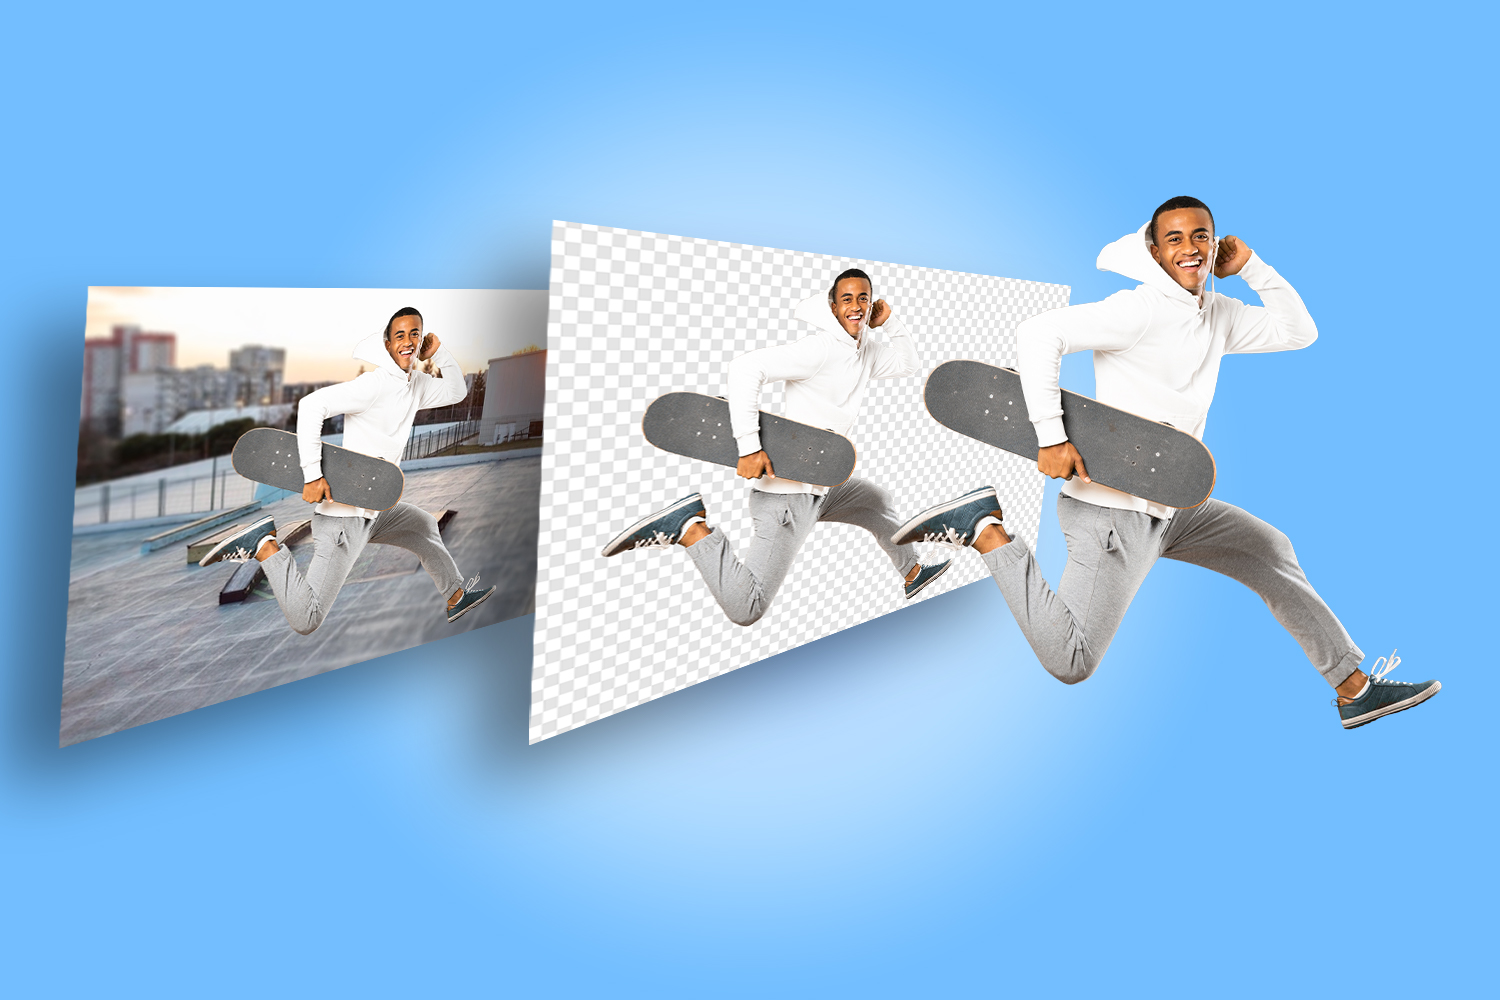 Image Background Removal Service Image